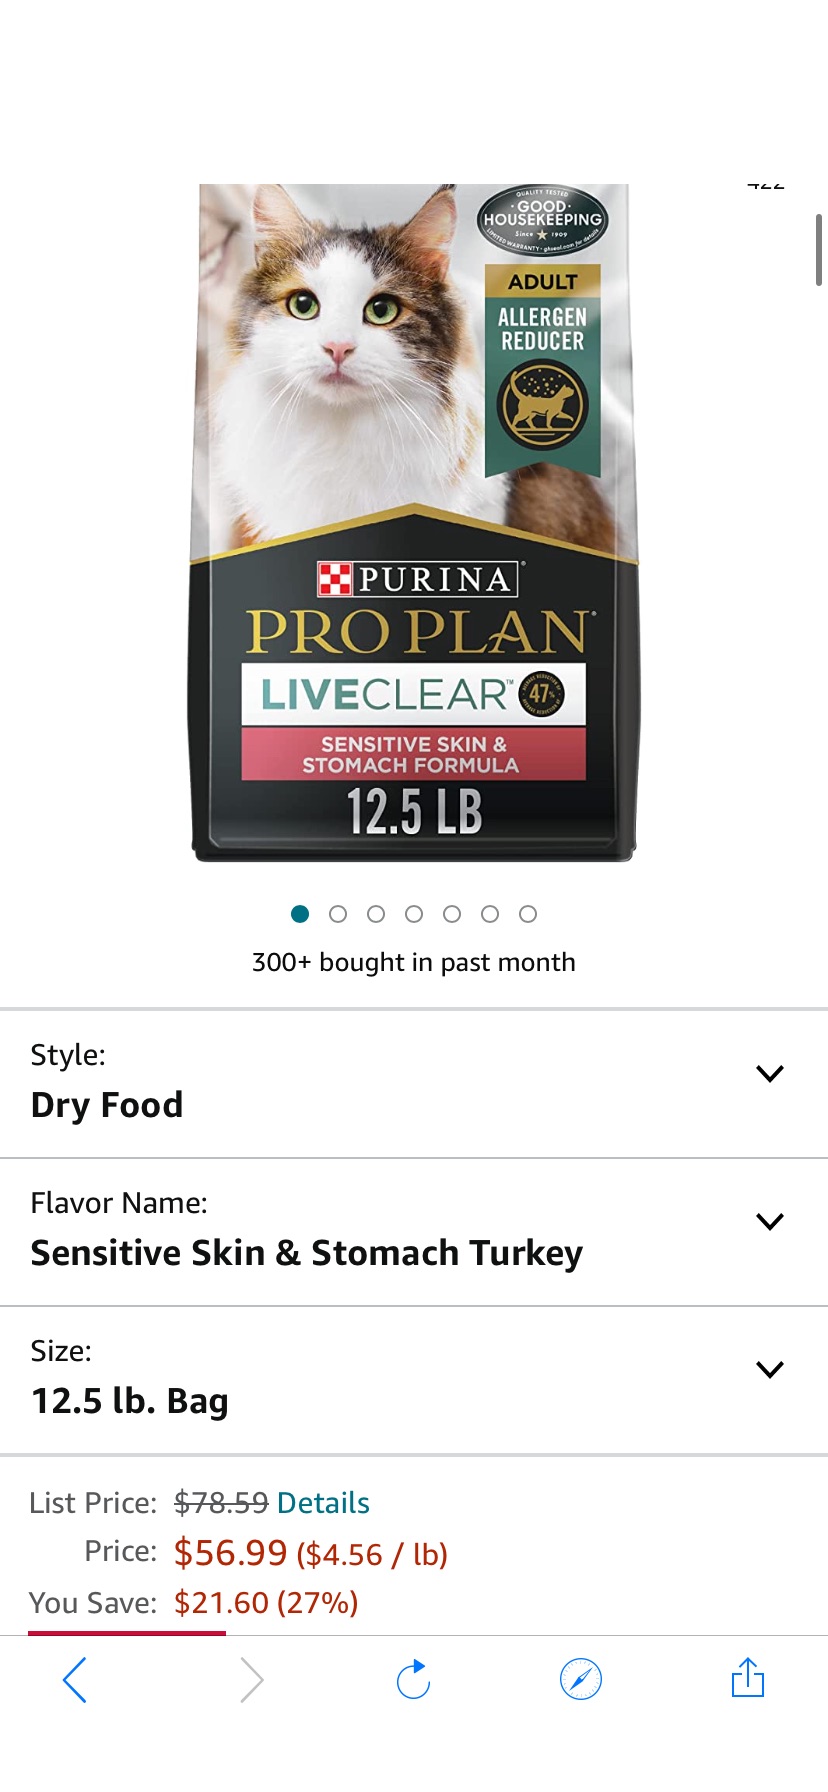 Amazon.com: 高蛋白质猫粮Purina Pro Plan Allergen Reducing, High Protein Cat Food, LIVECLEAR Turkey and Oatmeal Formula - 12.5 lb. Bag